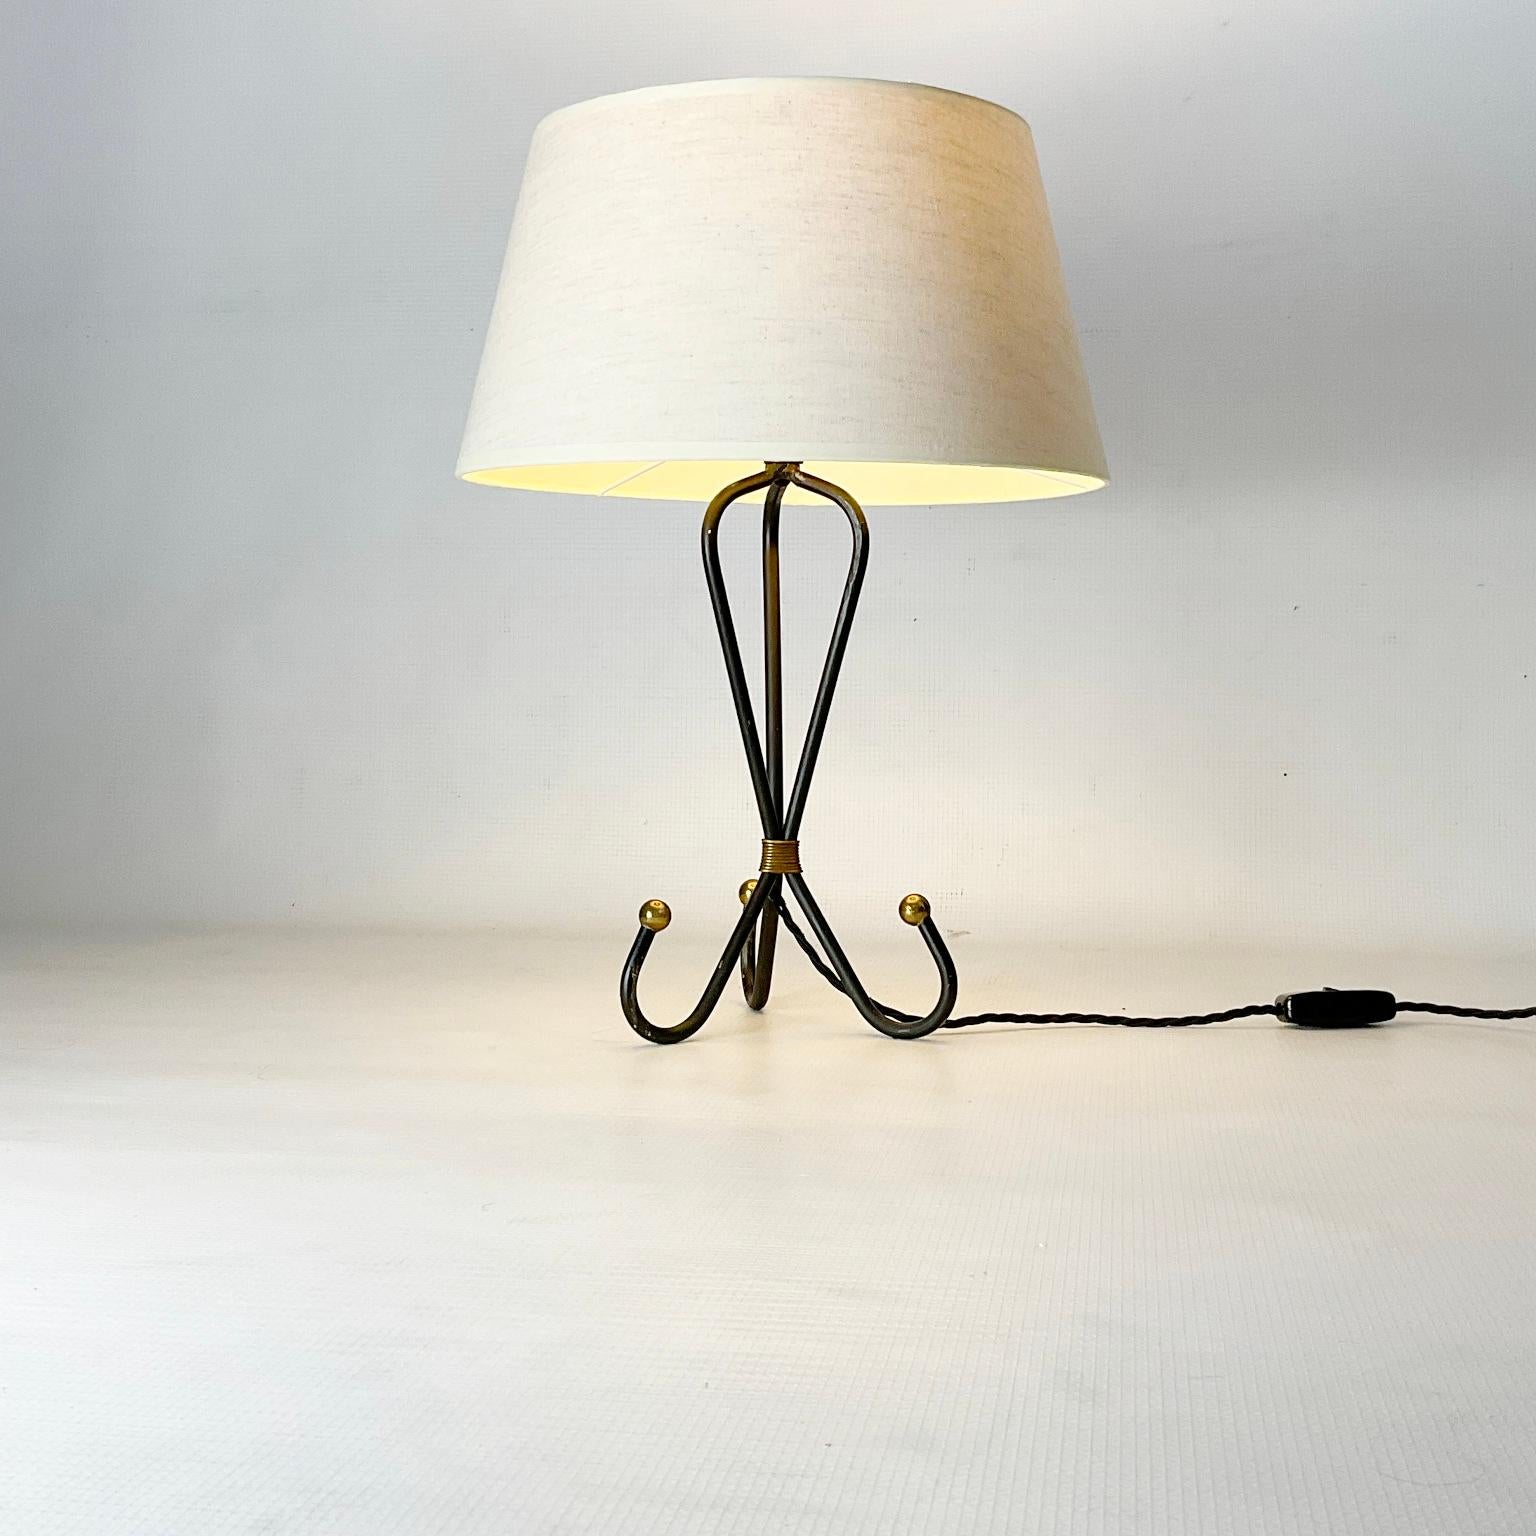 Mid-Century Modern 1950s Table Lamp Wrought Iron and Brass Finish